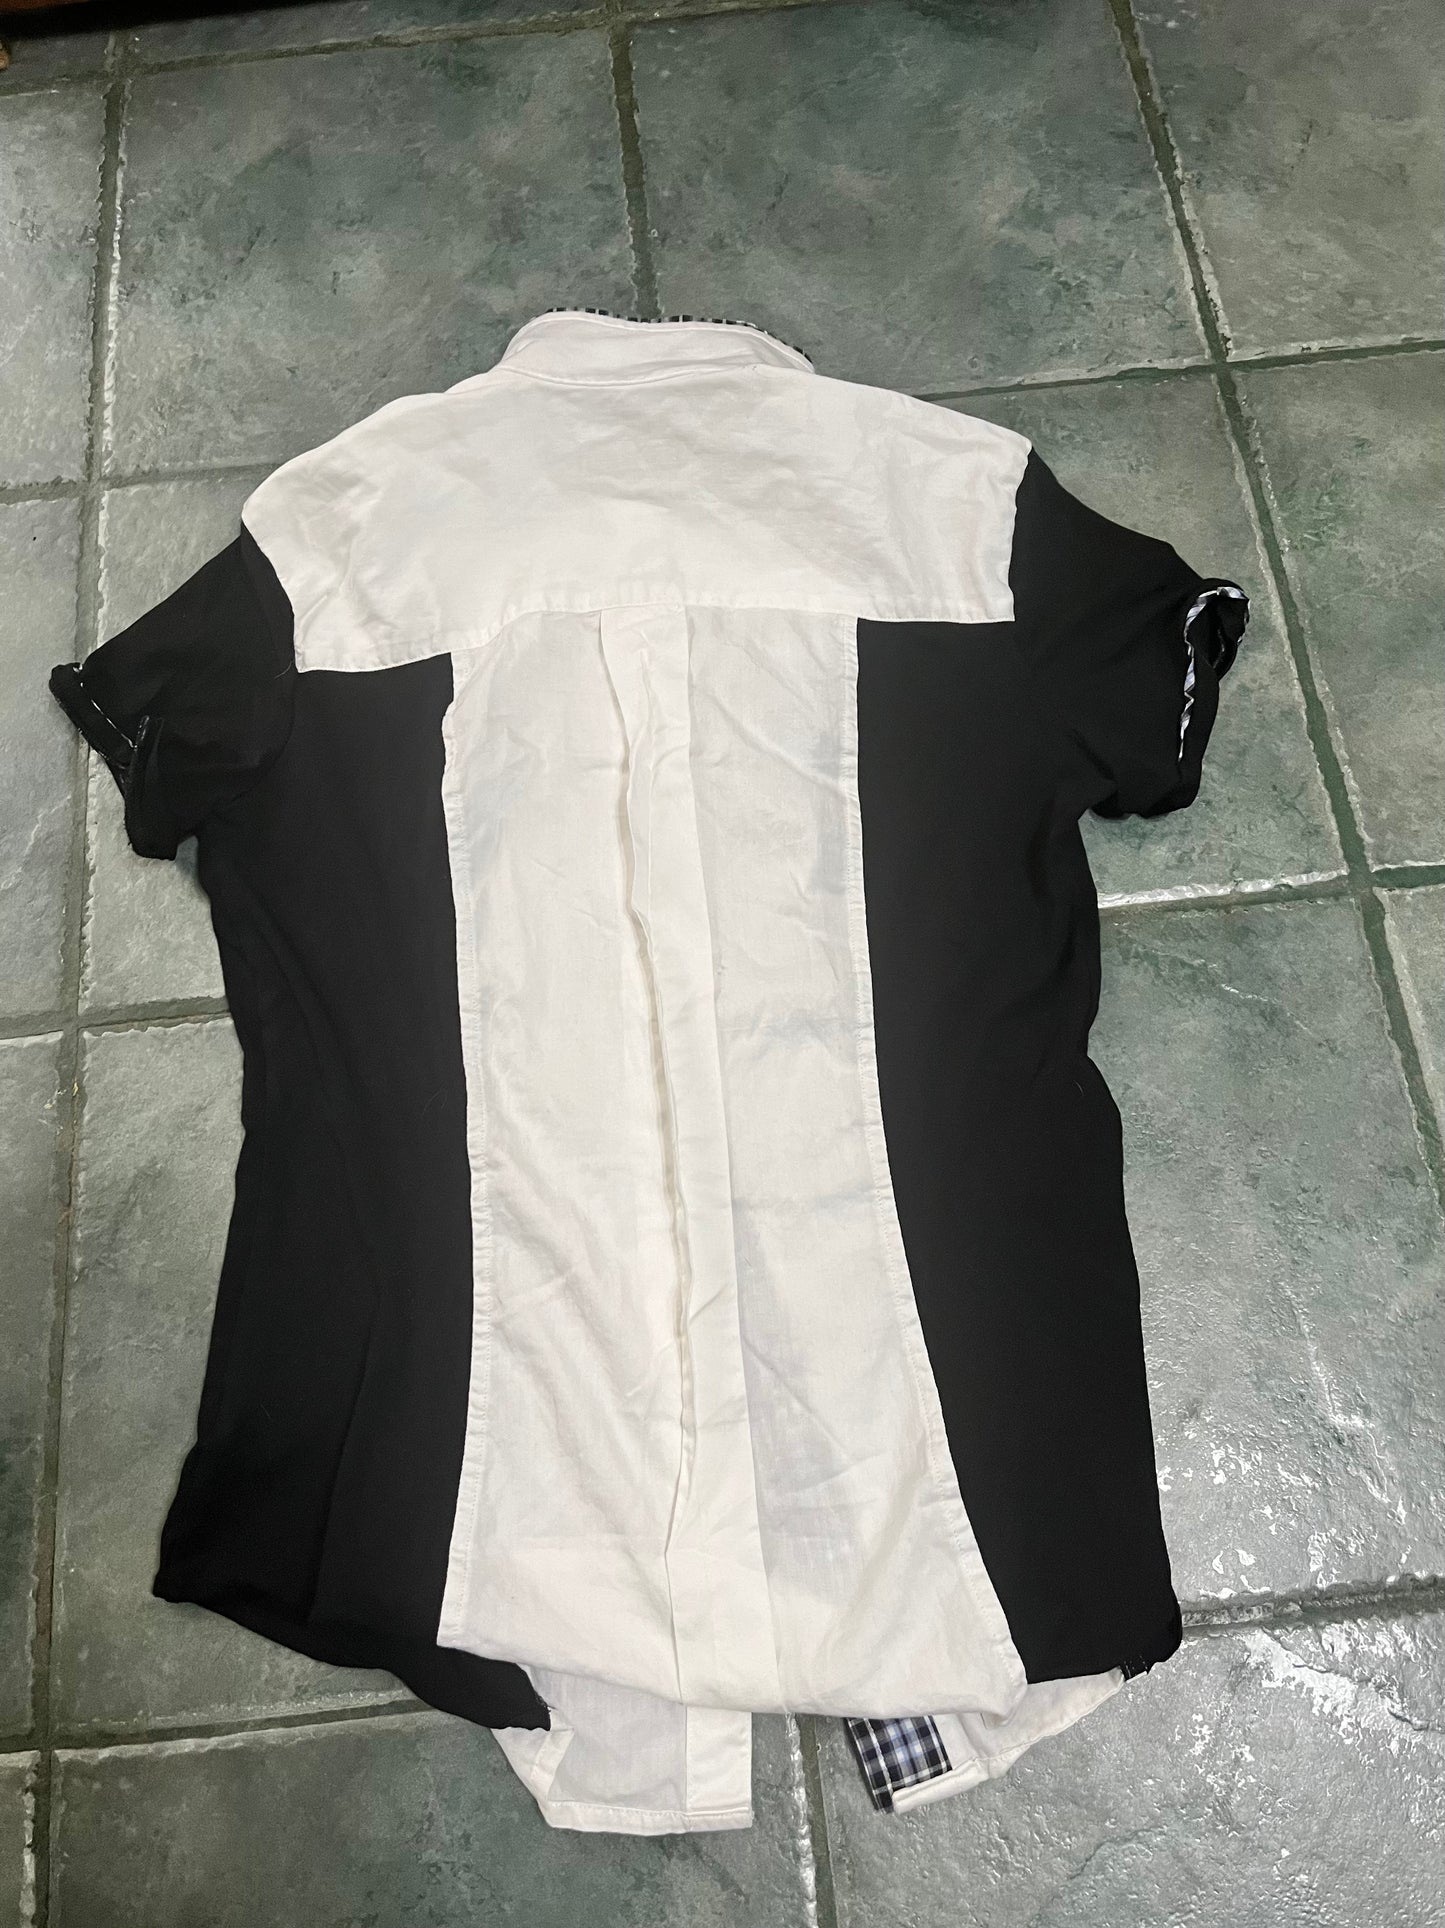 ieFash short sleeved shirt black and white XL